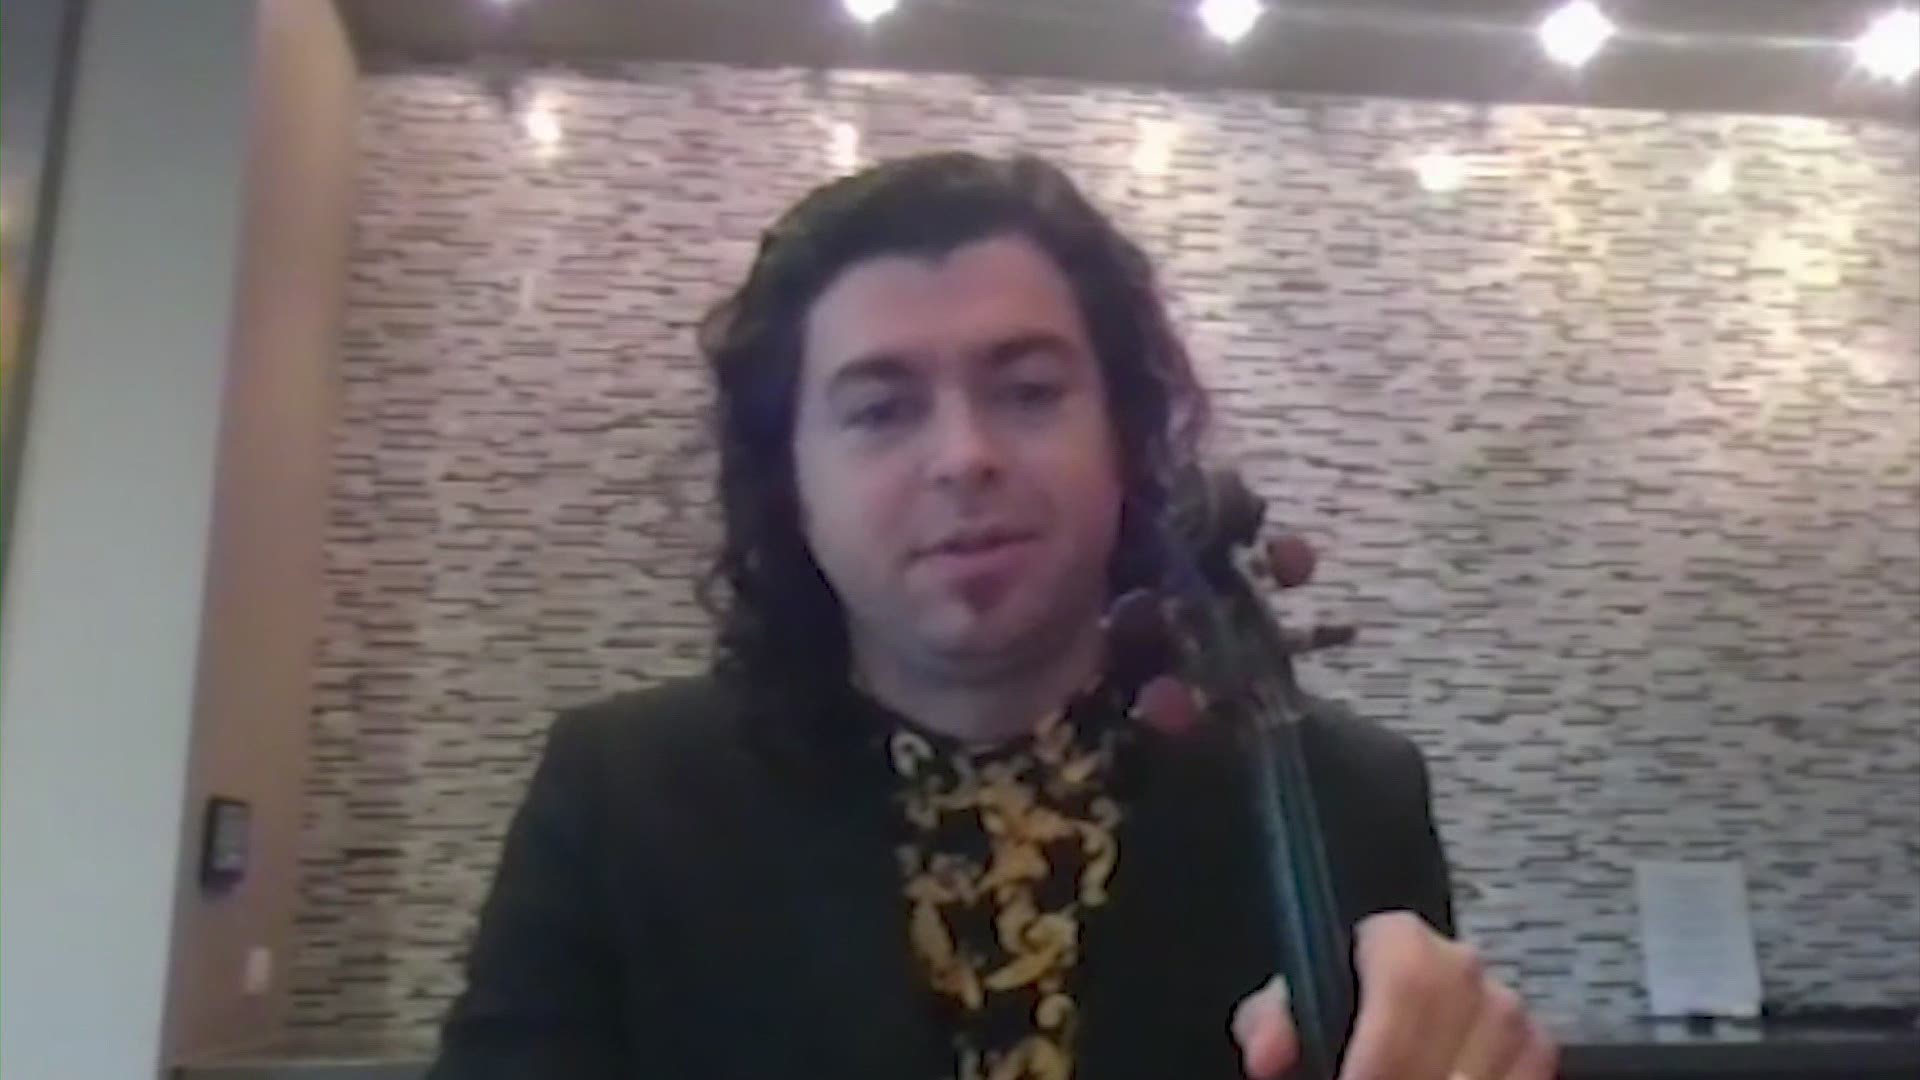 You can hire violinist Alberto Graulau to perform for your special someone via Zoom.